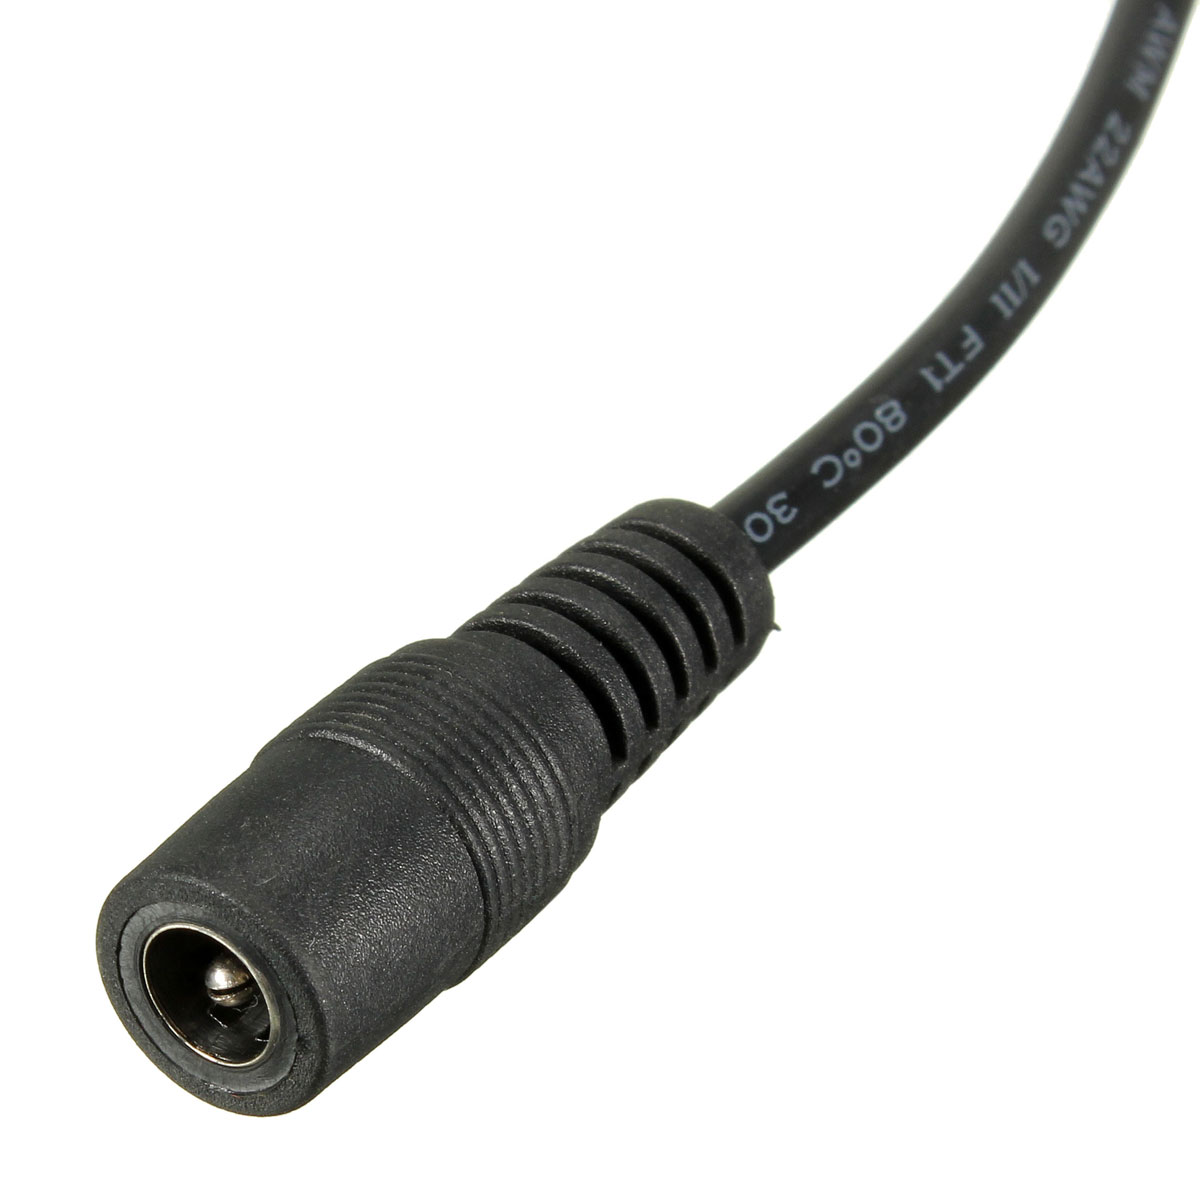 1M-DC-Power-Extension-Cable-DC-Jack-Female-to-Male-Plug-Cable-Adapter-Extension-Cord-Connector-1246600